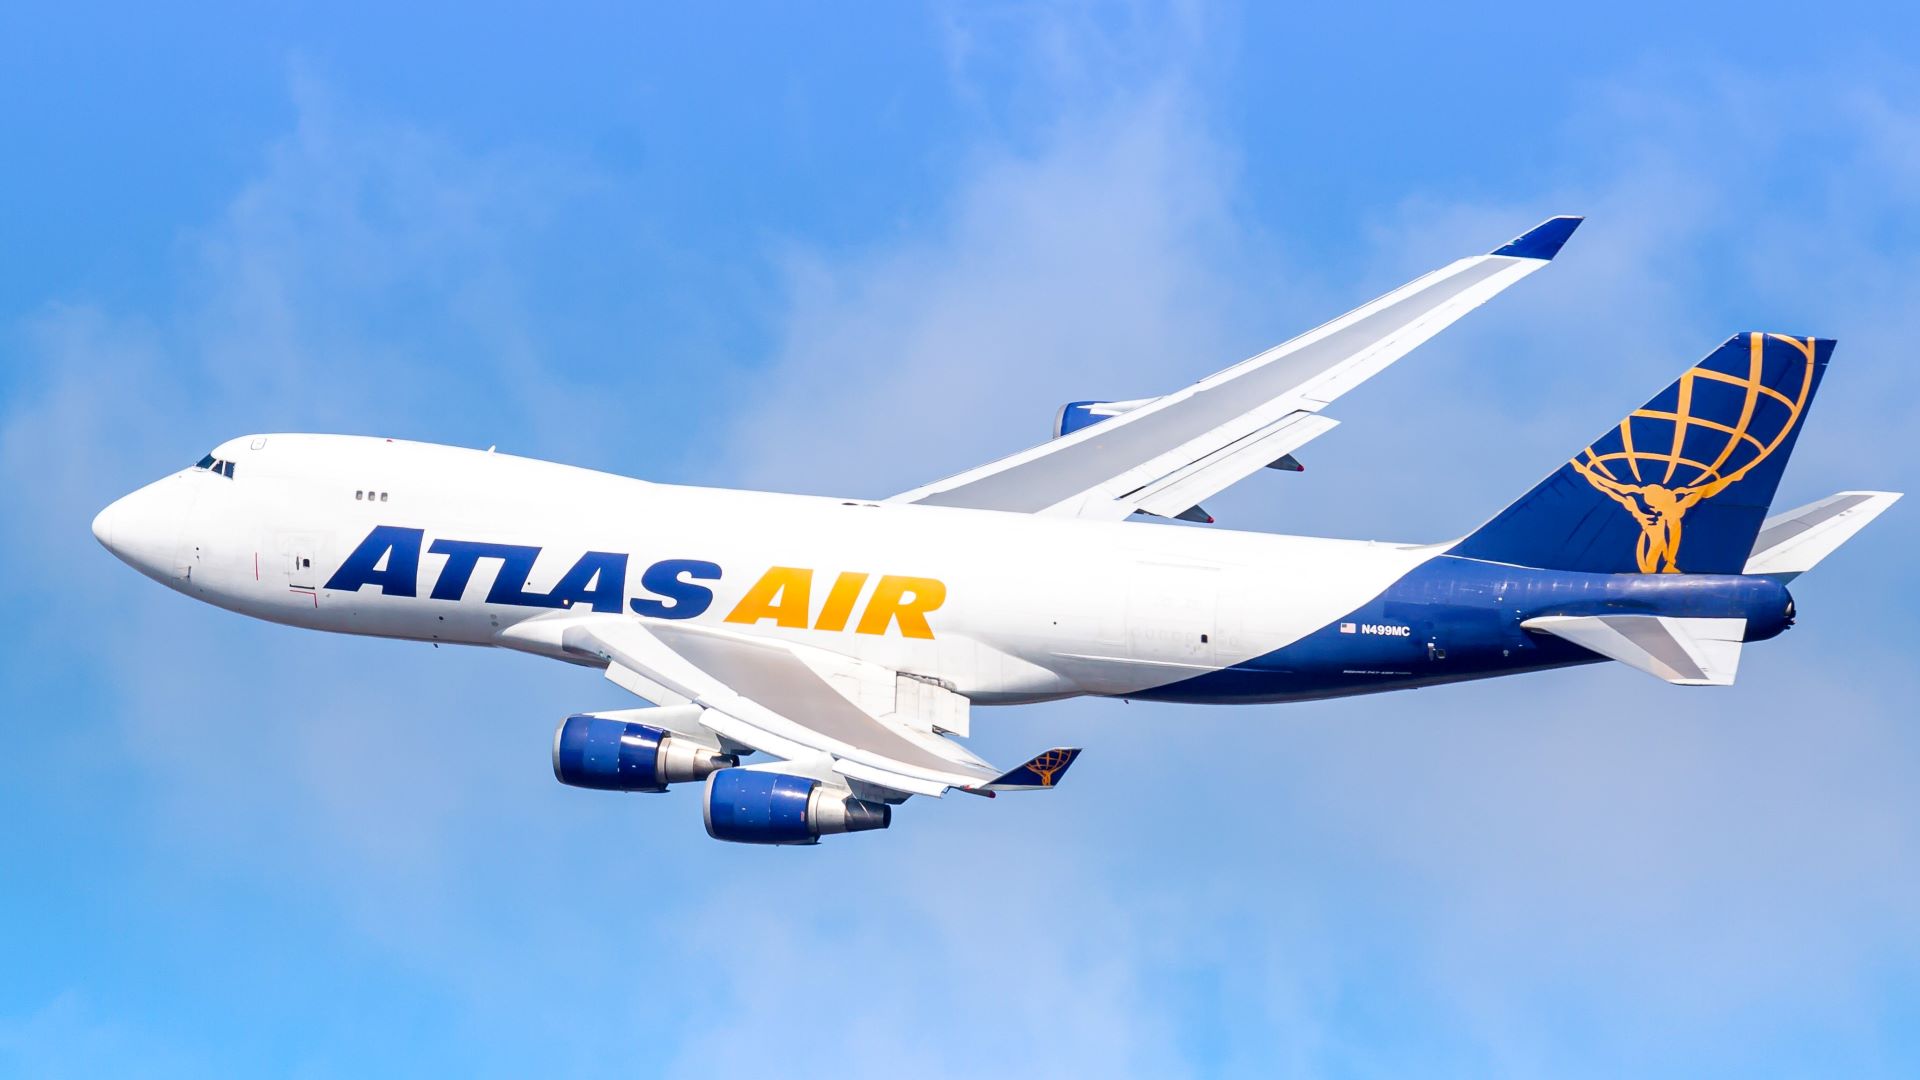 A white Atlas Air jumbo jet with blue tail, and gold lettering flies in blue sky.